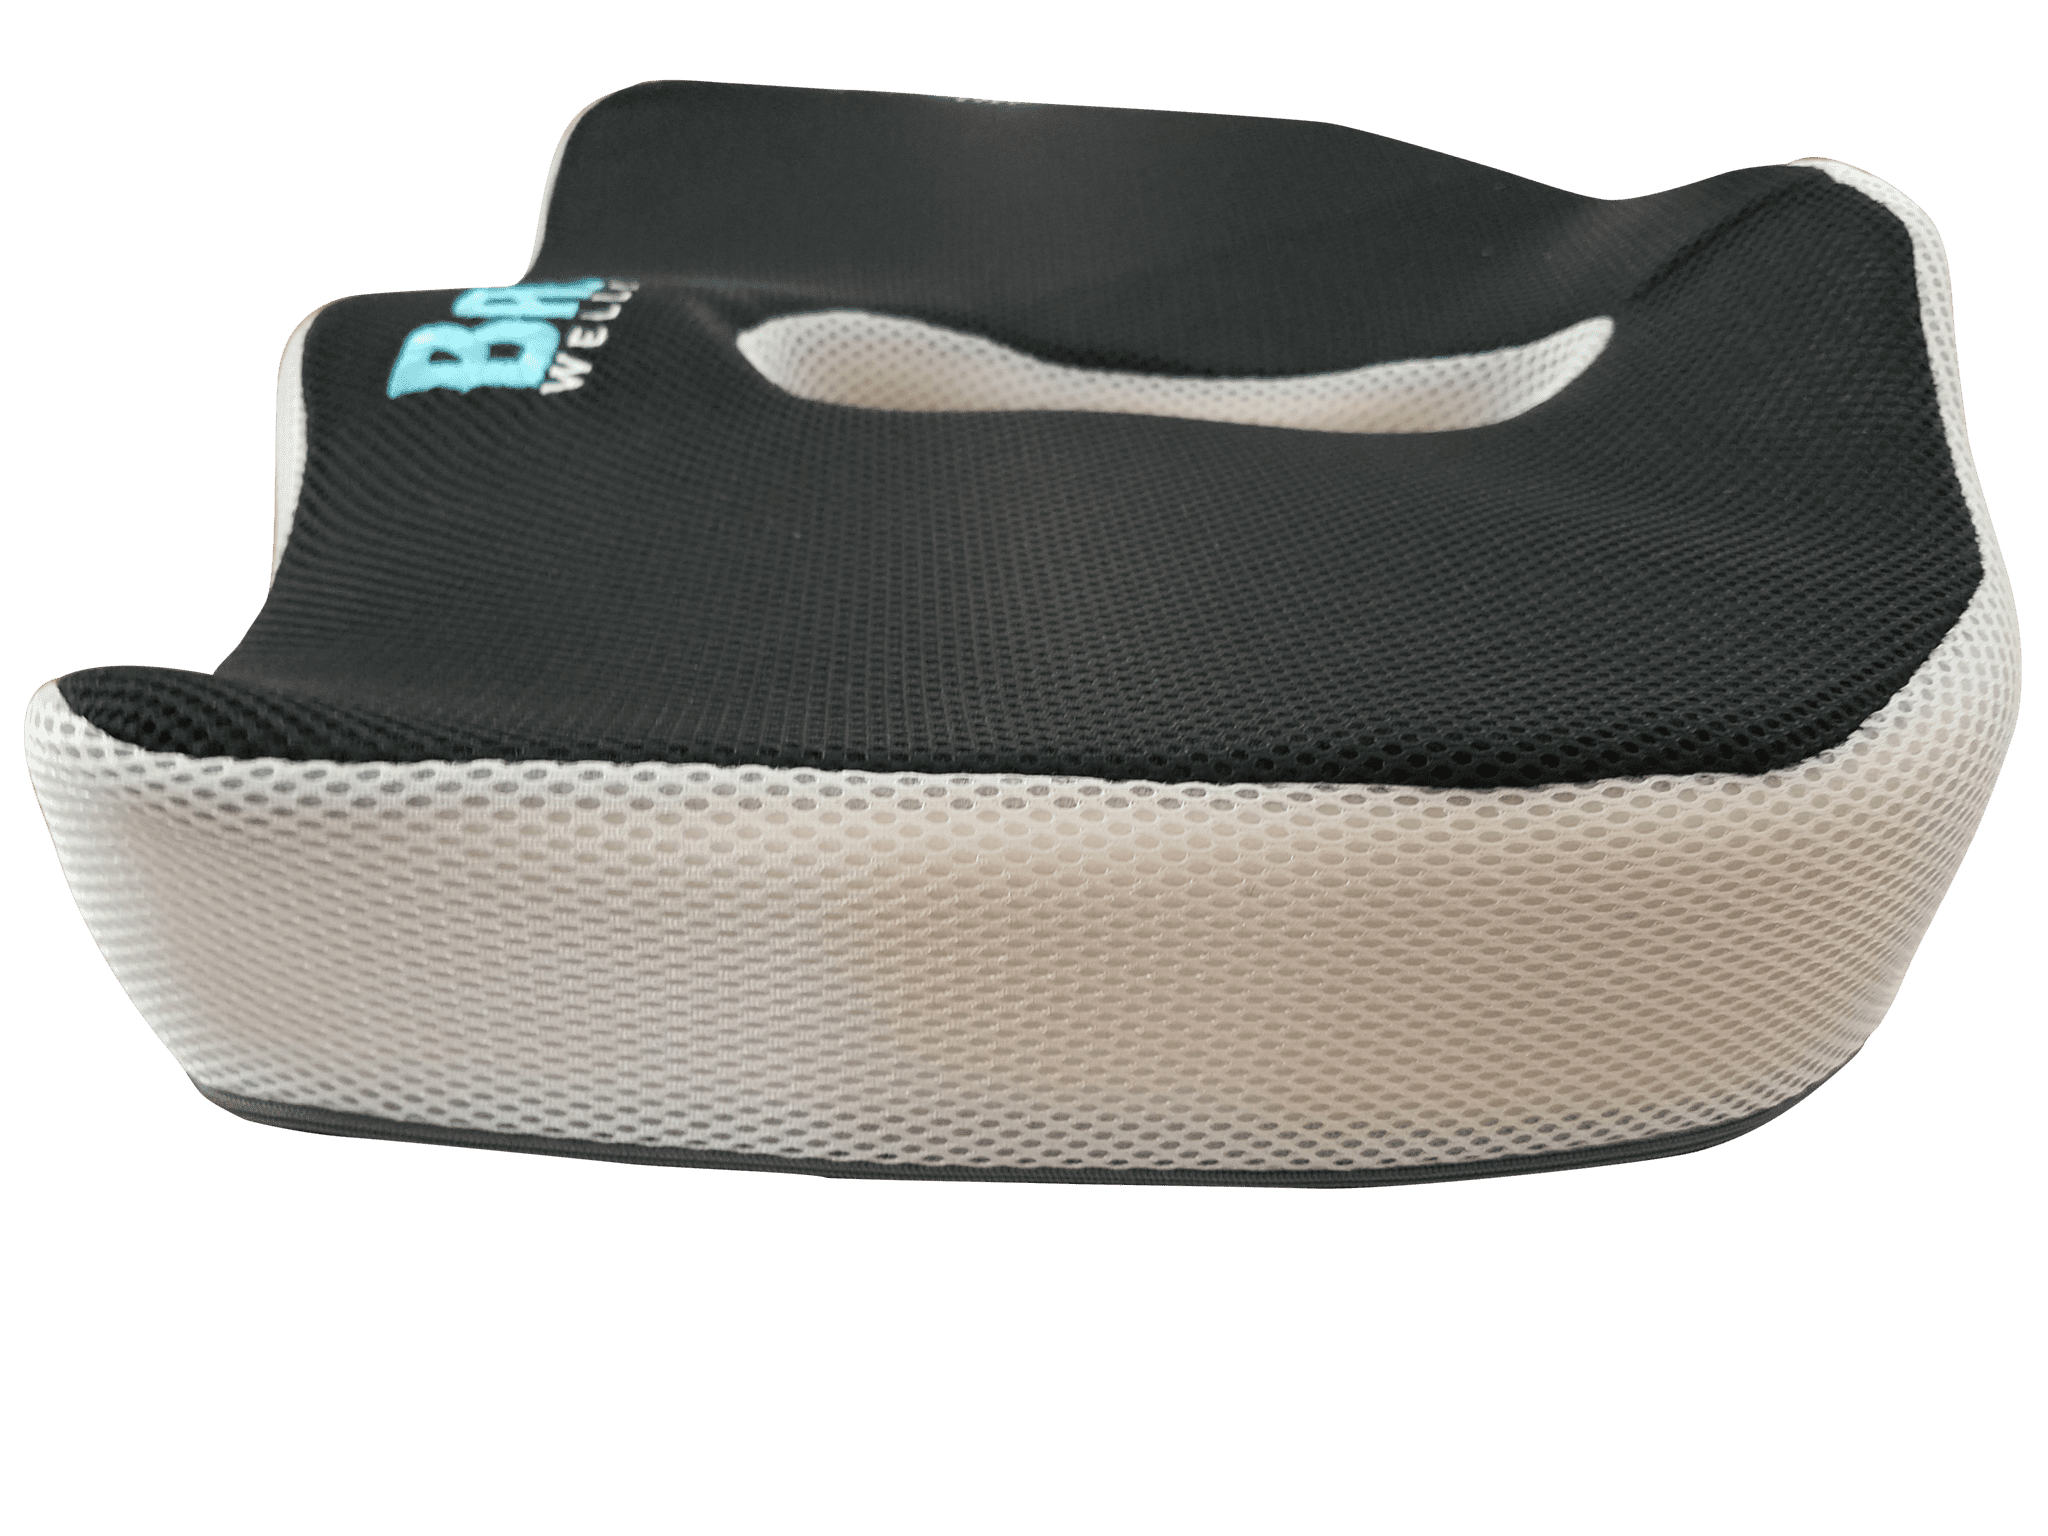 BAEL WELLNESS Premium Orthopedic Seat Cushion for Back Pain and Sciatica  Relief (1)